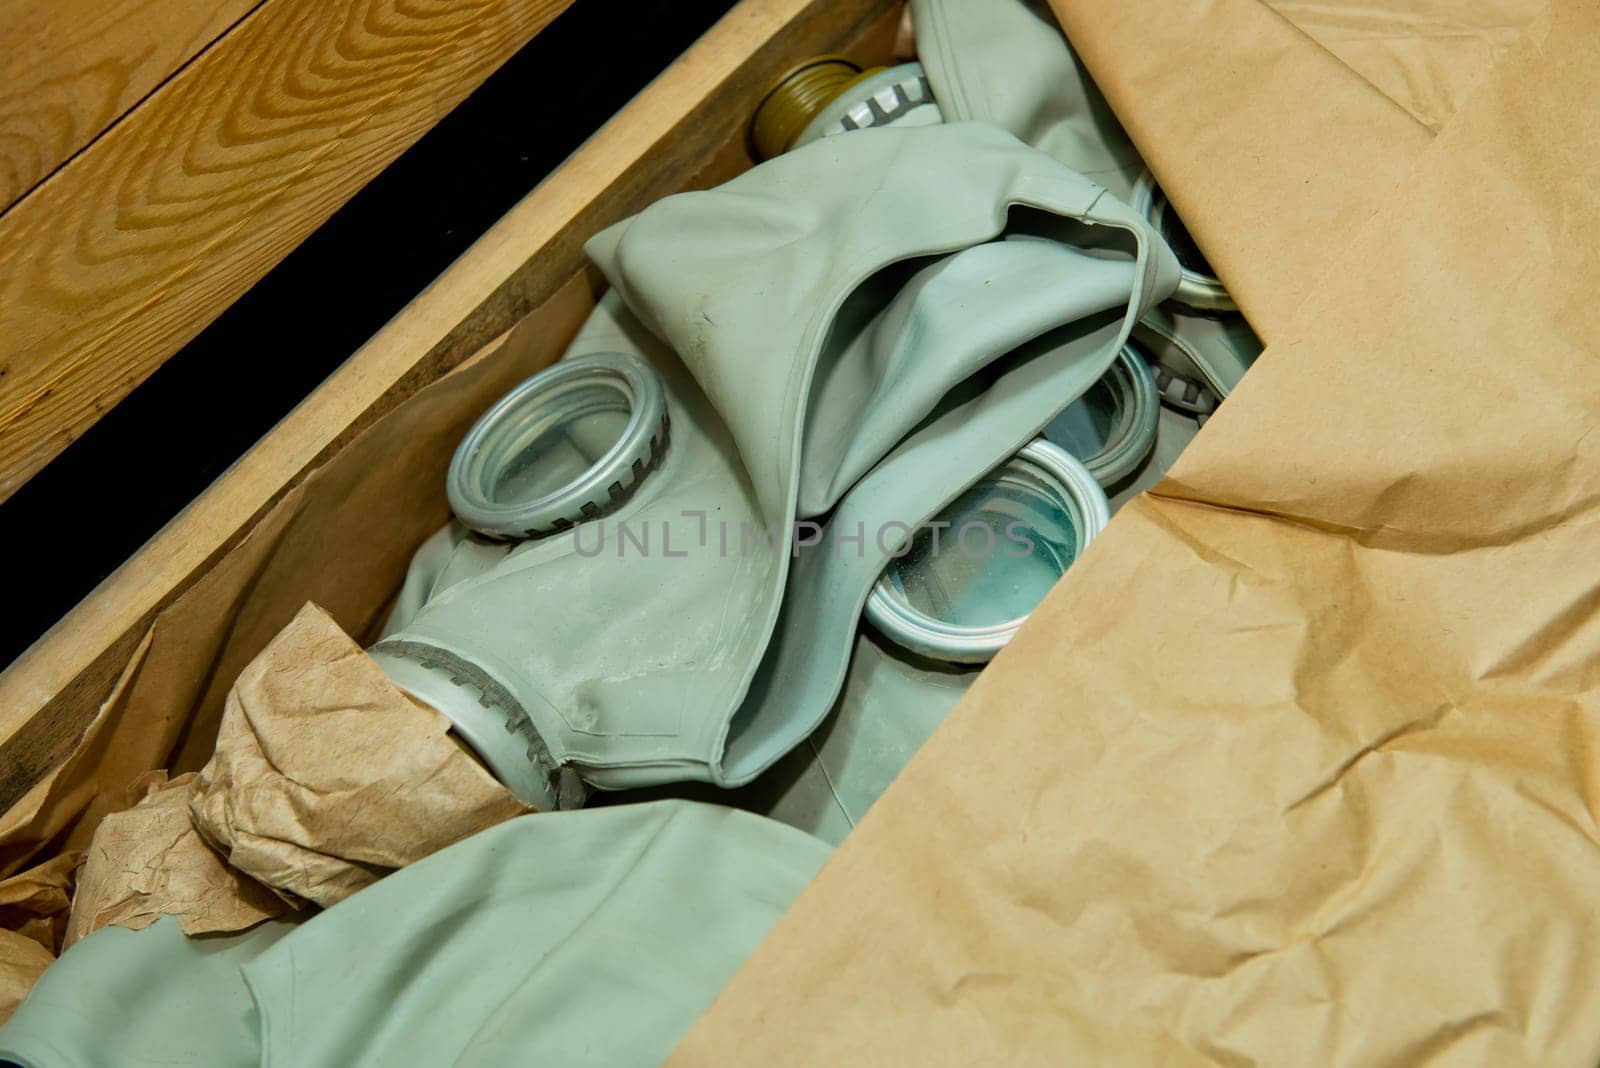 Soviet gas mask in a wooden box. Warehouse of Soviet protective equipment. Close-up.